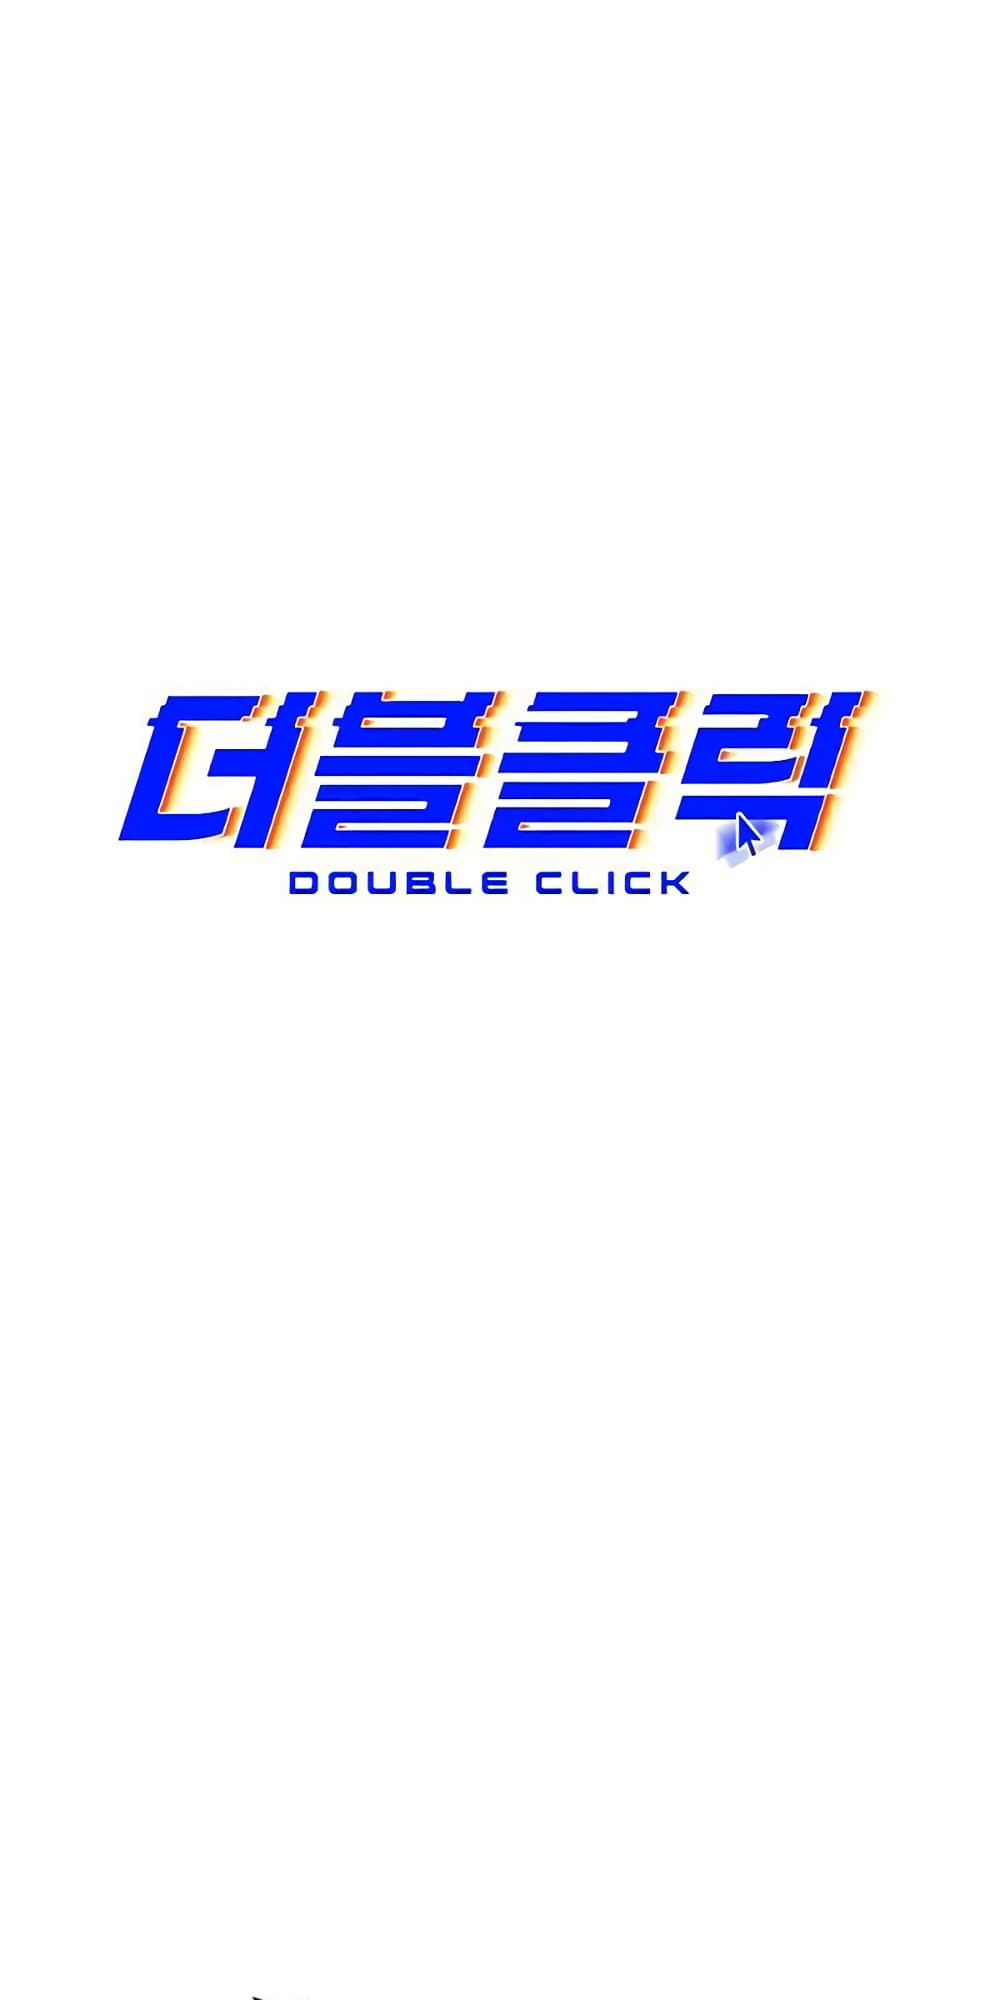 Double Click 5-5